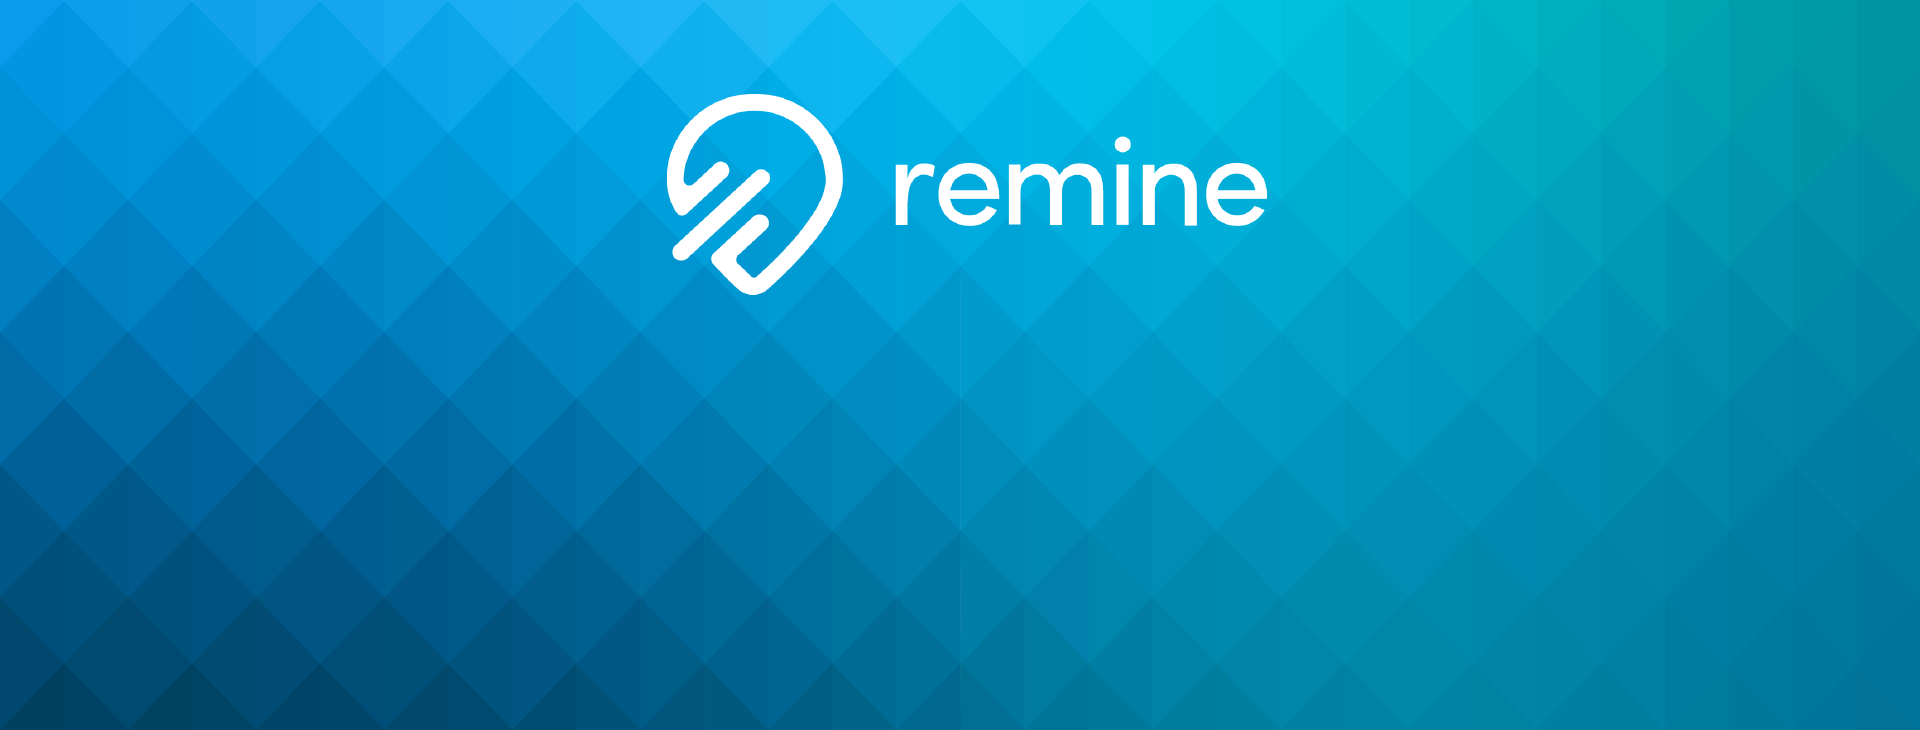 Image for New Client and Agent Updates in Remine